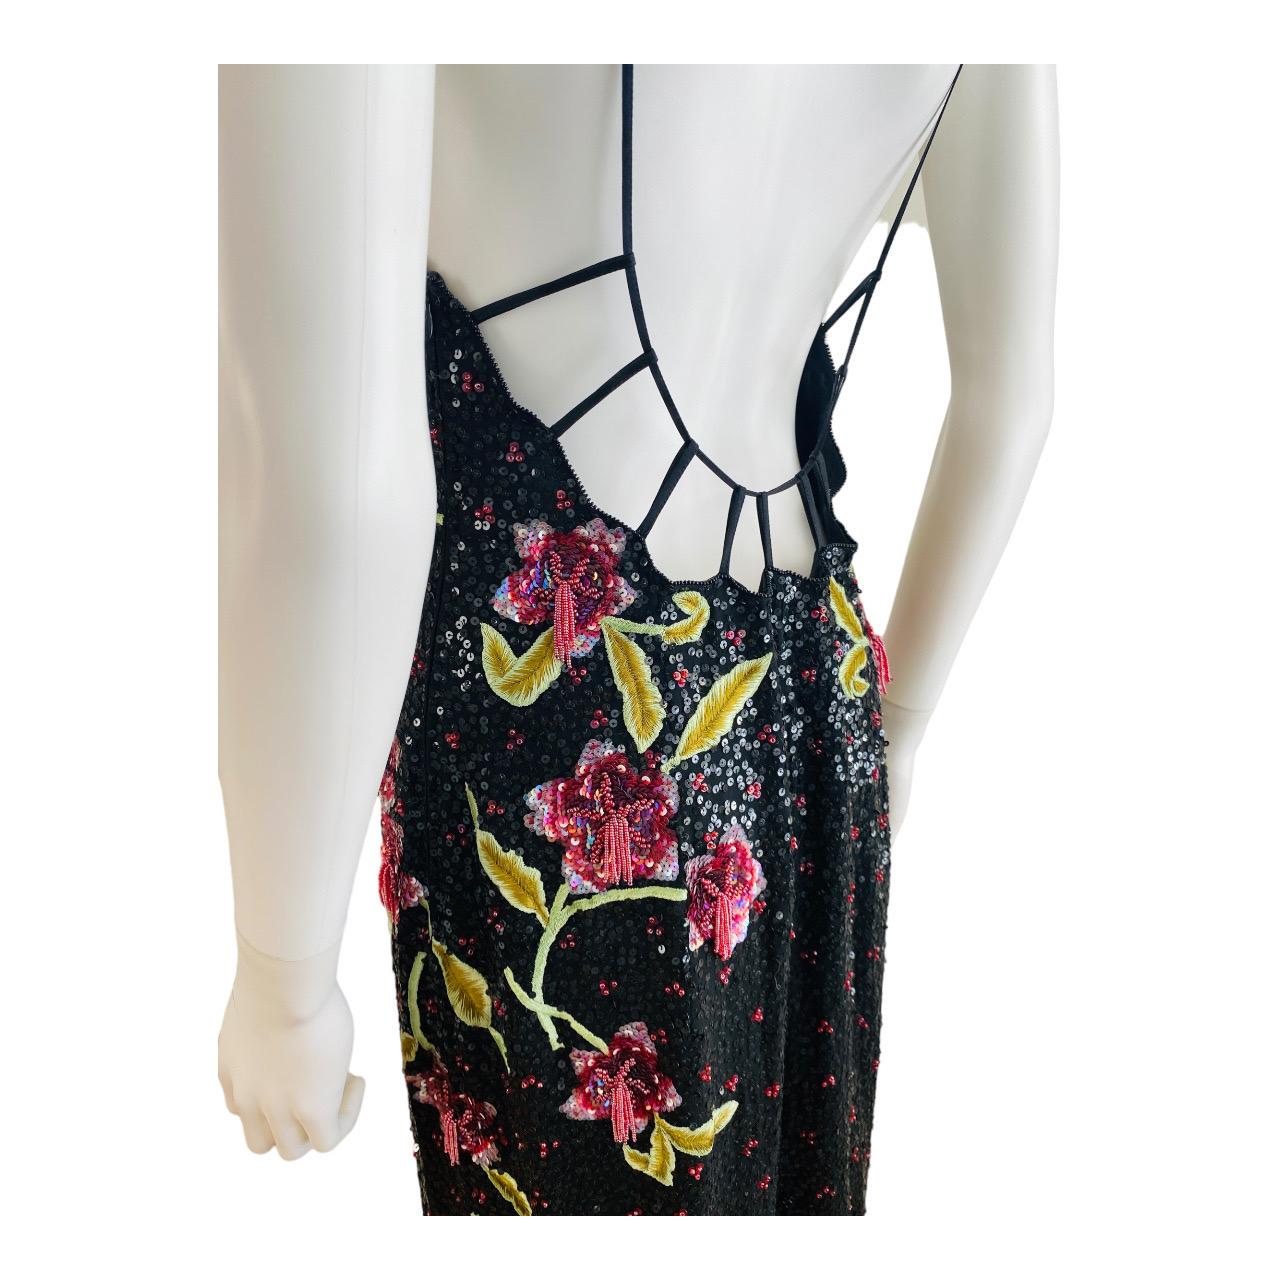 Vintage 2002 Escada Hand Beaded Sequin Floral Maxi Dress Gown Black Pink Flowers For Sale 10